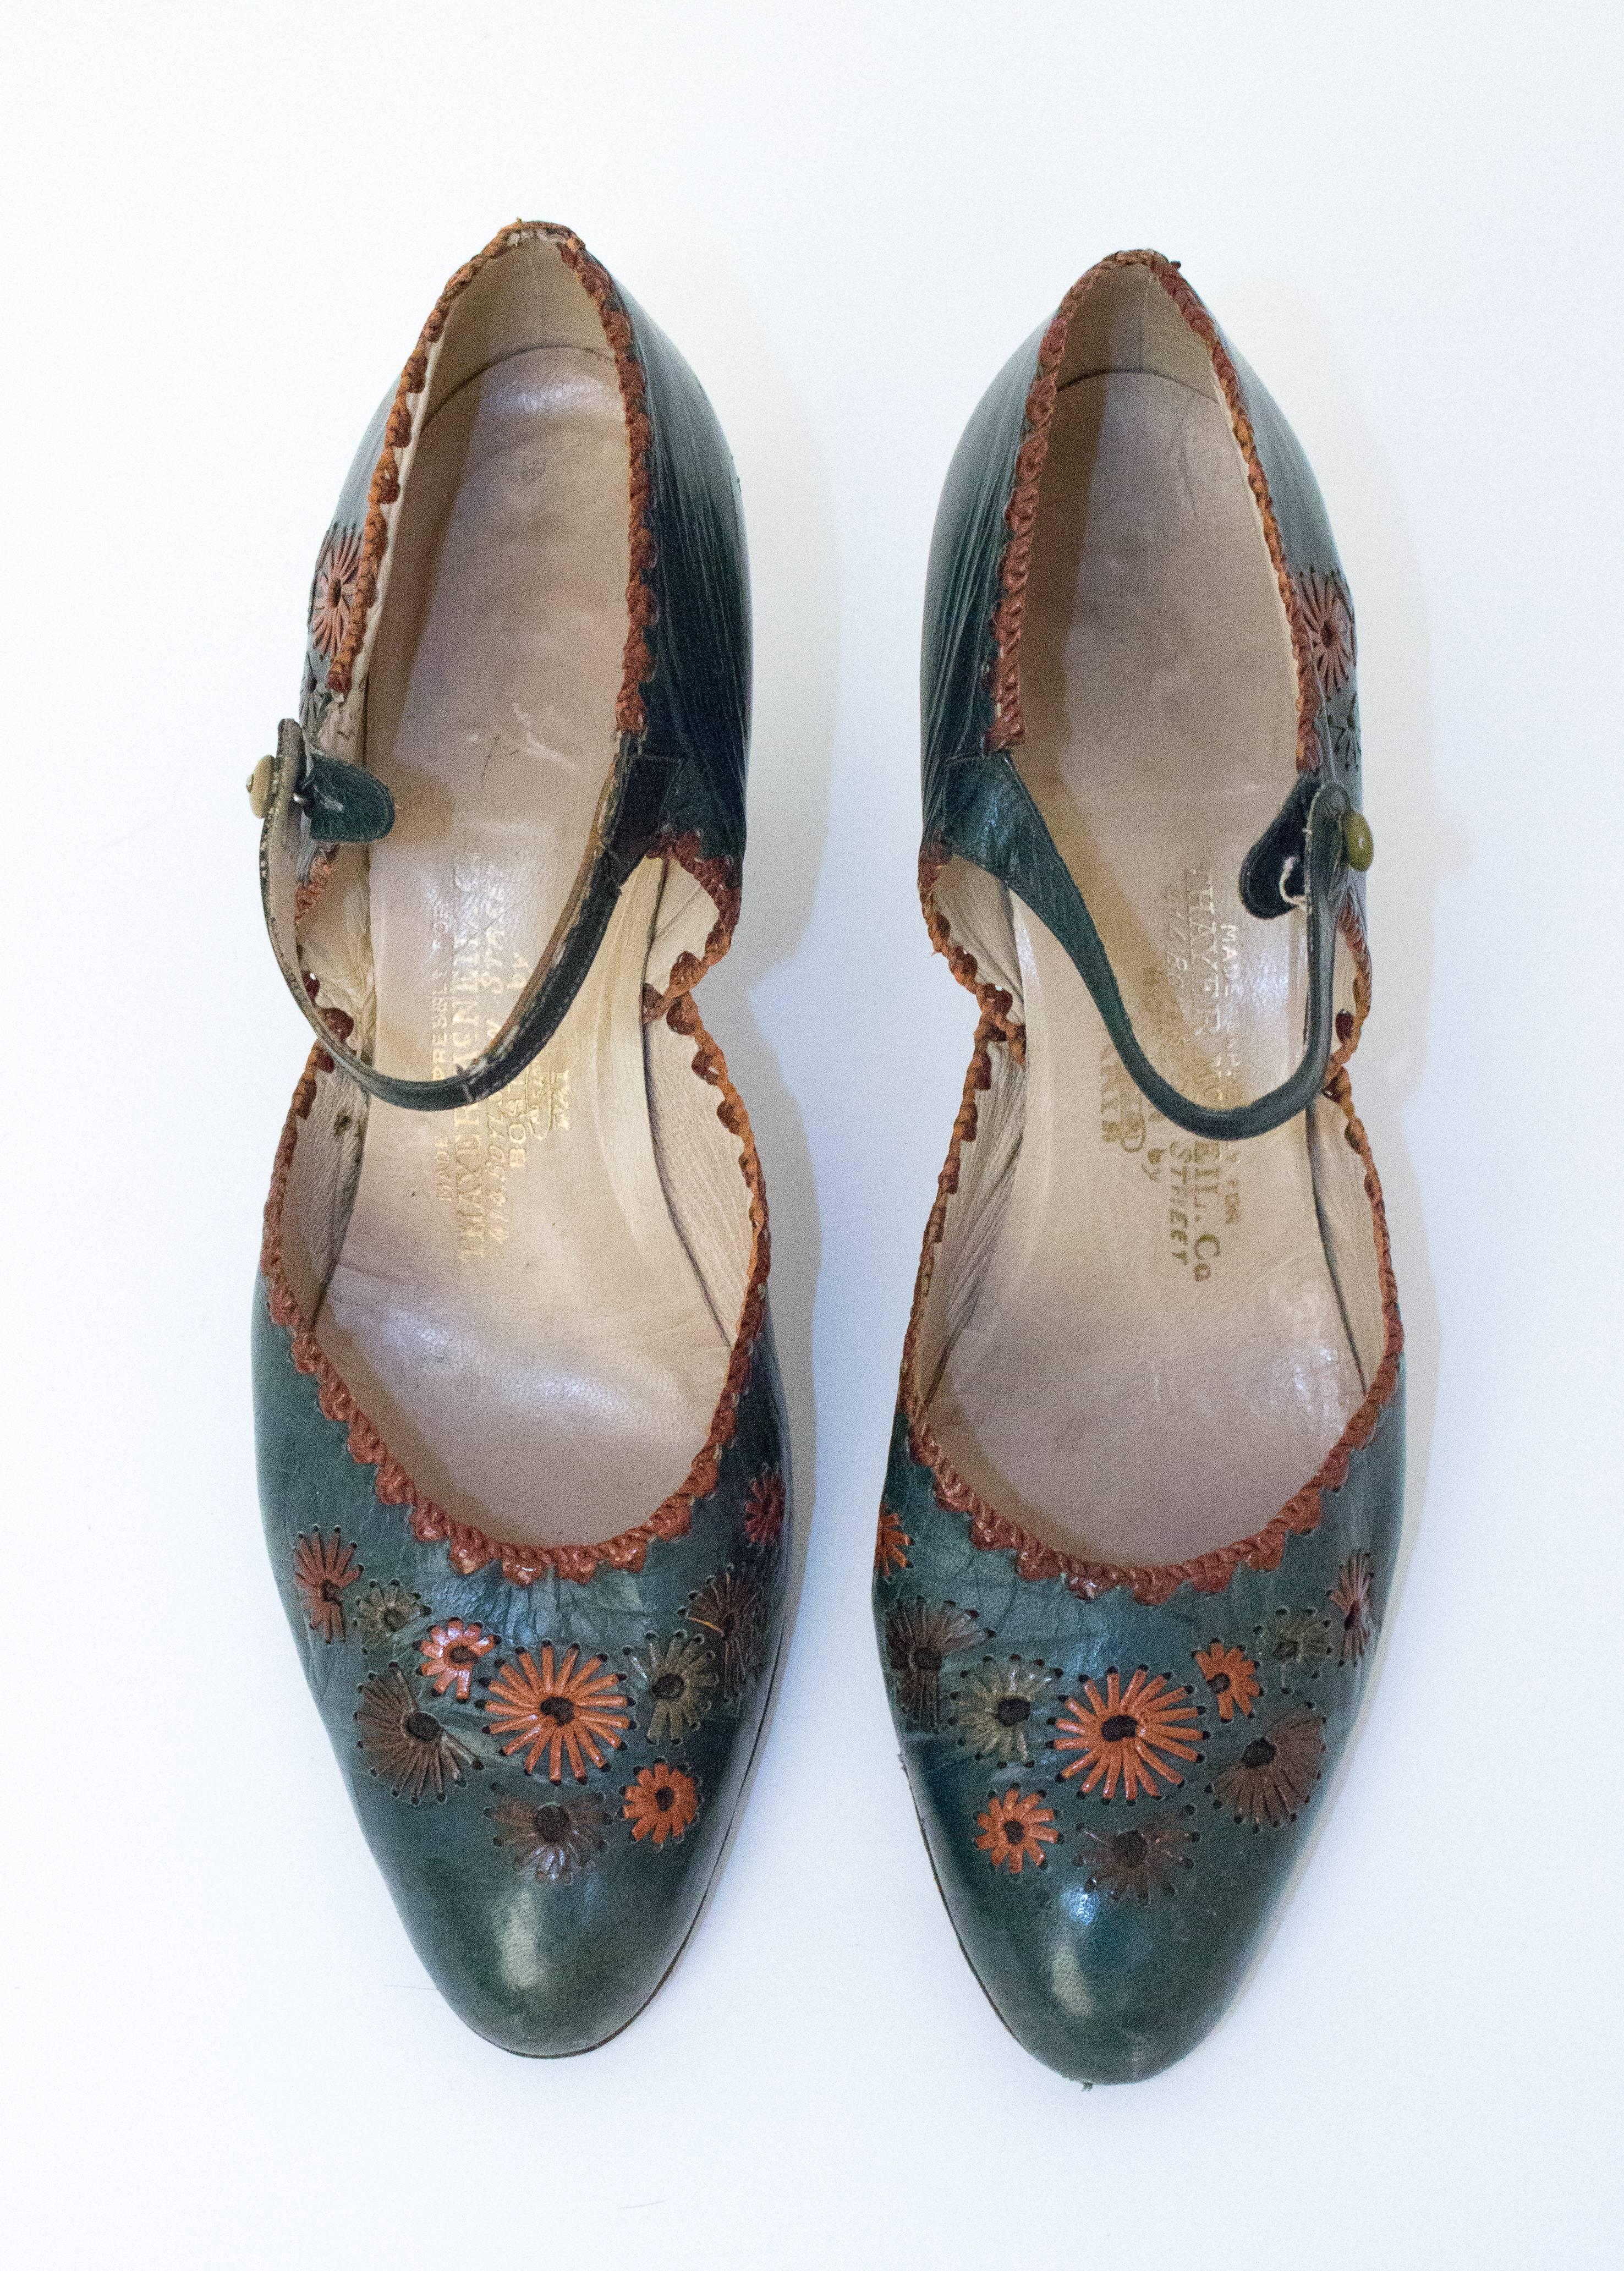 20s Green Leather Mary Jane Heels with Floral Embellishments. Leather soles. Bakelite buttons. 

Measurements:
Insole: 9 1/2